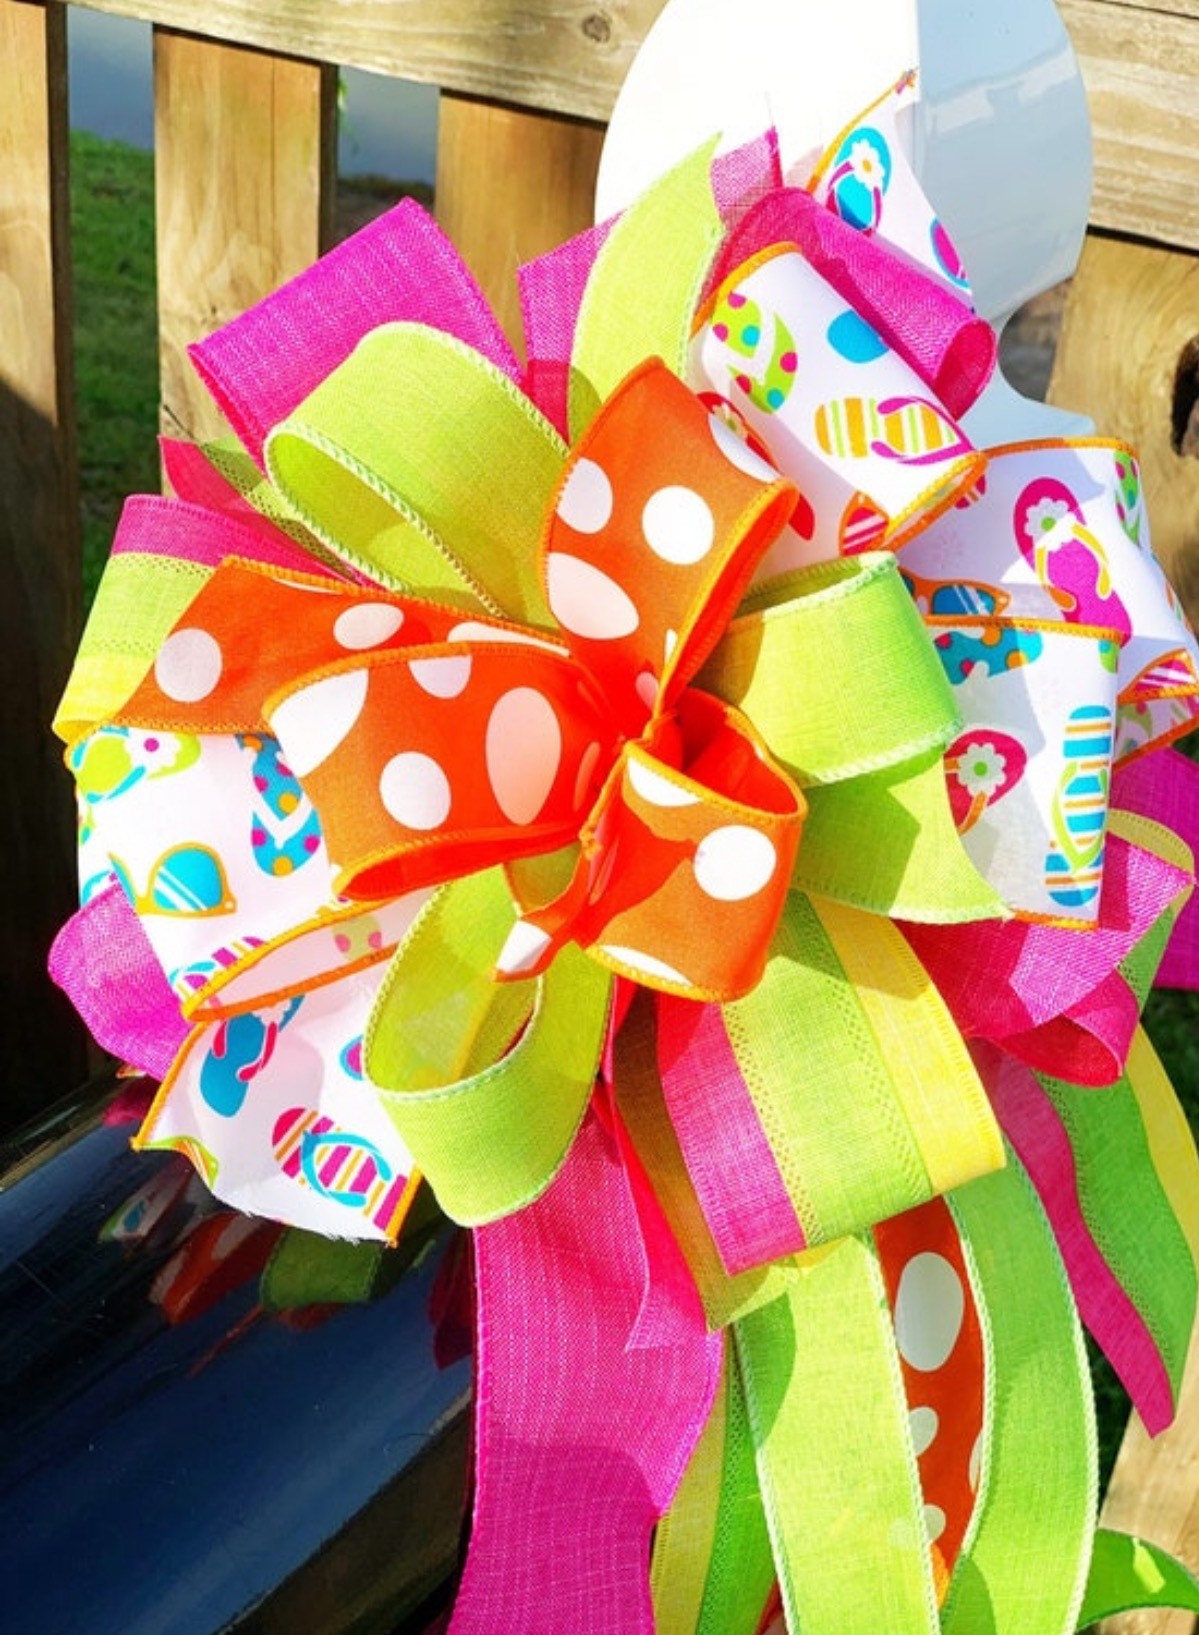 Summer Collection - Gift Set,Plaque,Summer Plaque,Summer Bow,Summer Decor,Bow, Bows,Mailbox Bow,Wreath Bow,Gift,Flip Flops Flop Bow,Ribbon